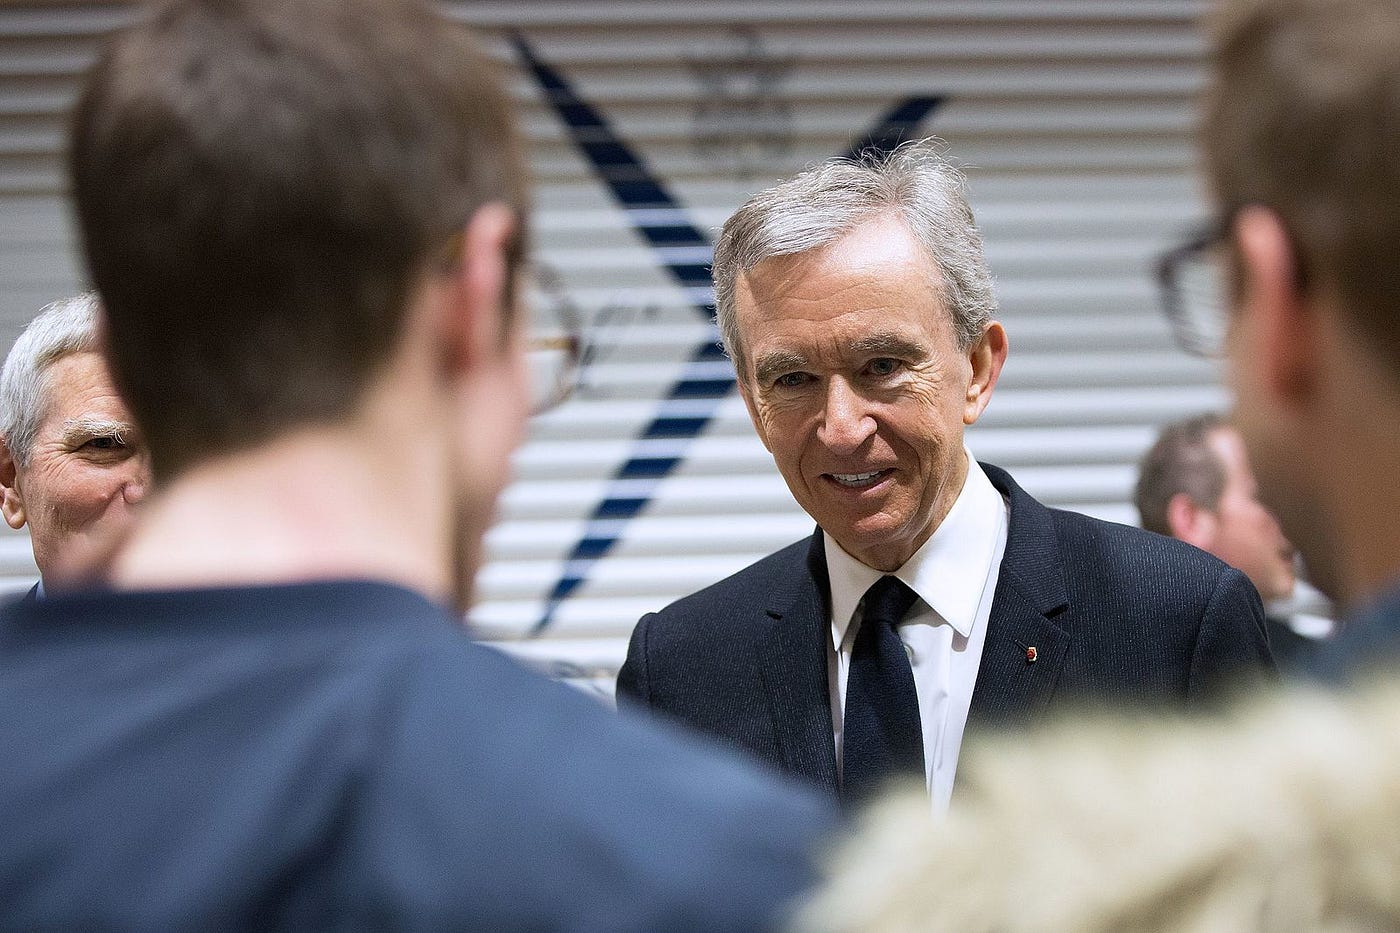 THE ECONOMIST: How Bernard Arnault became the world's richest person